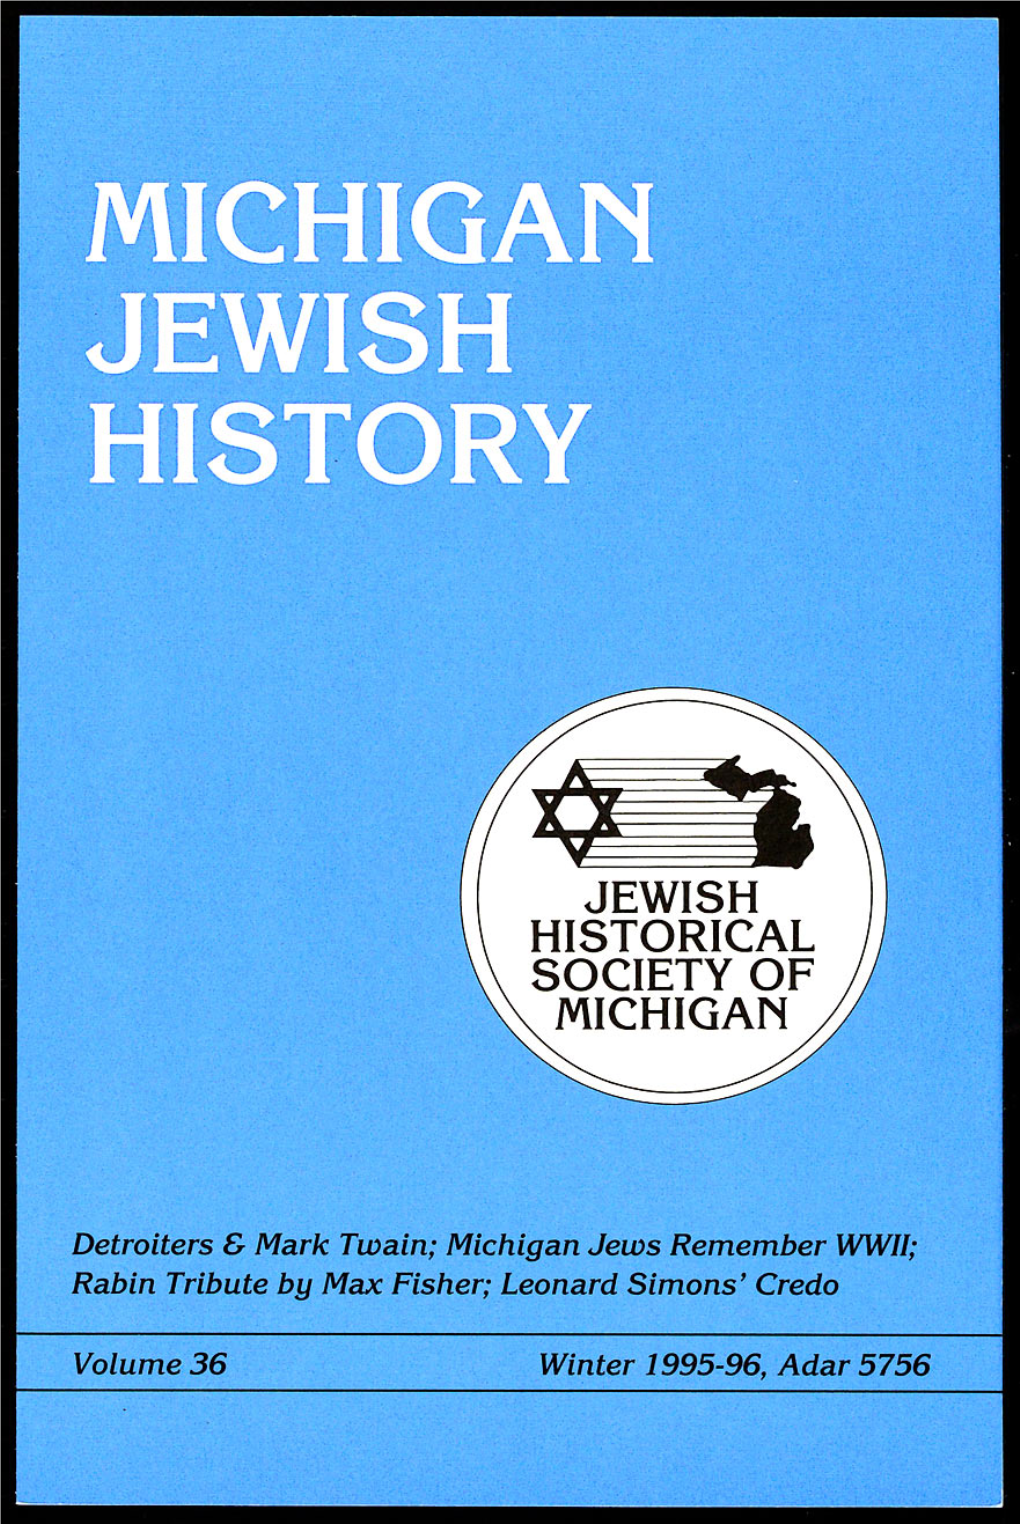 MICHIGAN JEWISH HISTORY Is Published by the Jewish Historical Society of Michigan